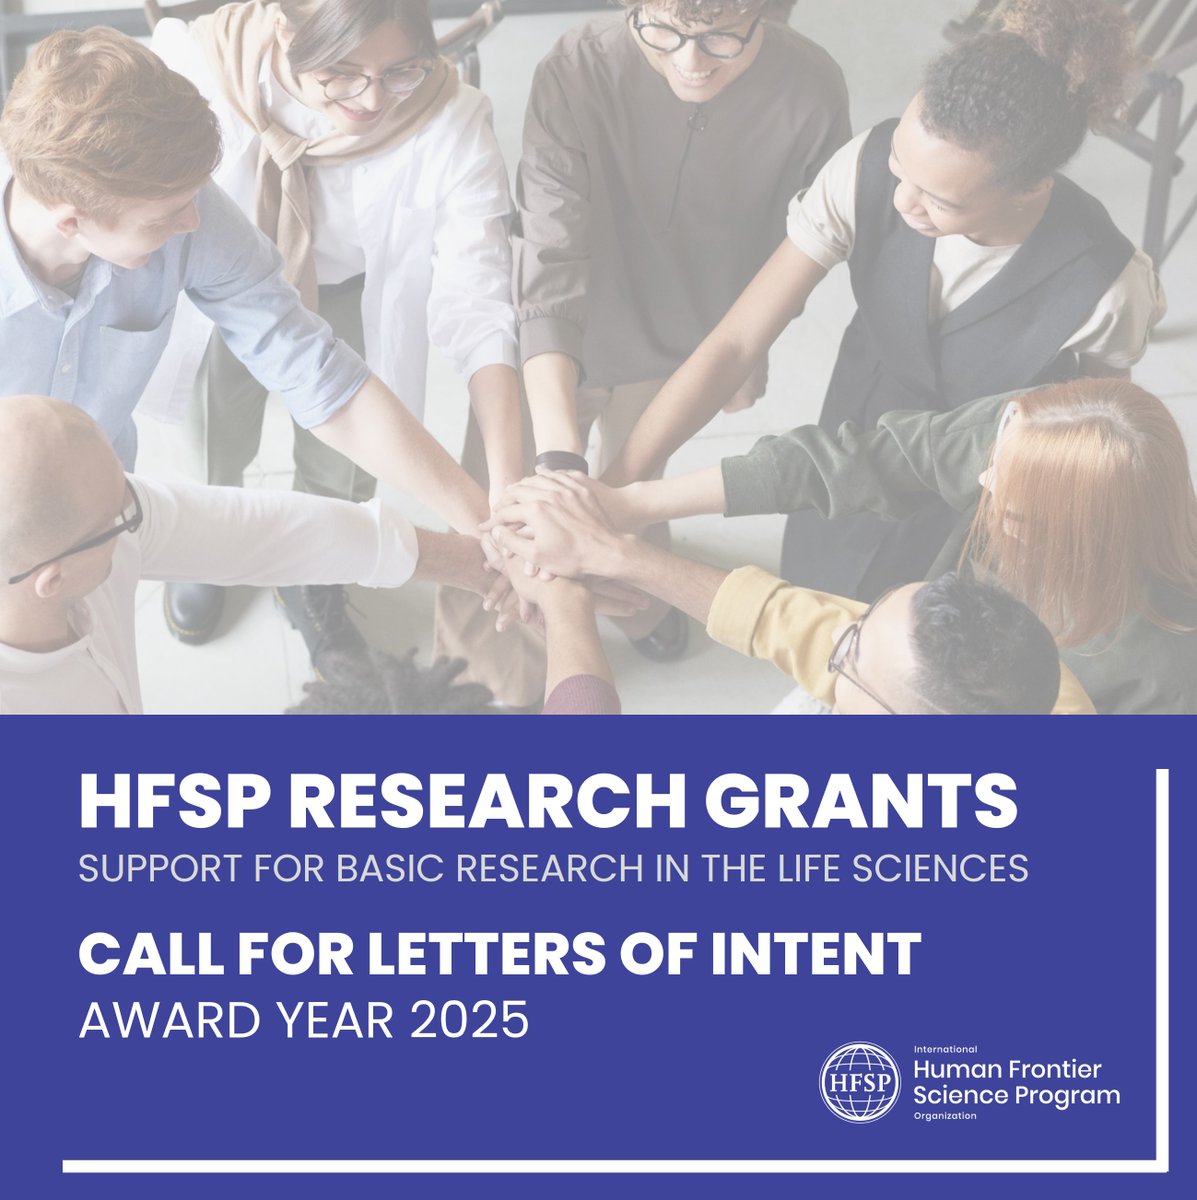 Applications are now open 🎉🎉🎉If you have a really wild idea to research, it's time to put it in a letter of intent and apply! #HFSPResearchGrants support new paths of research in #BasicLifeSciences. Go for it 💪 Read + bit.ly/3U2zjgY